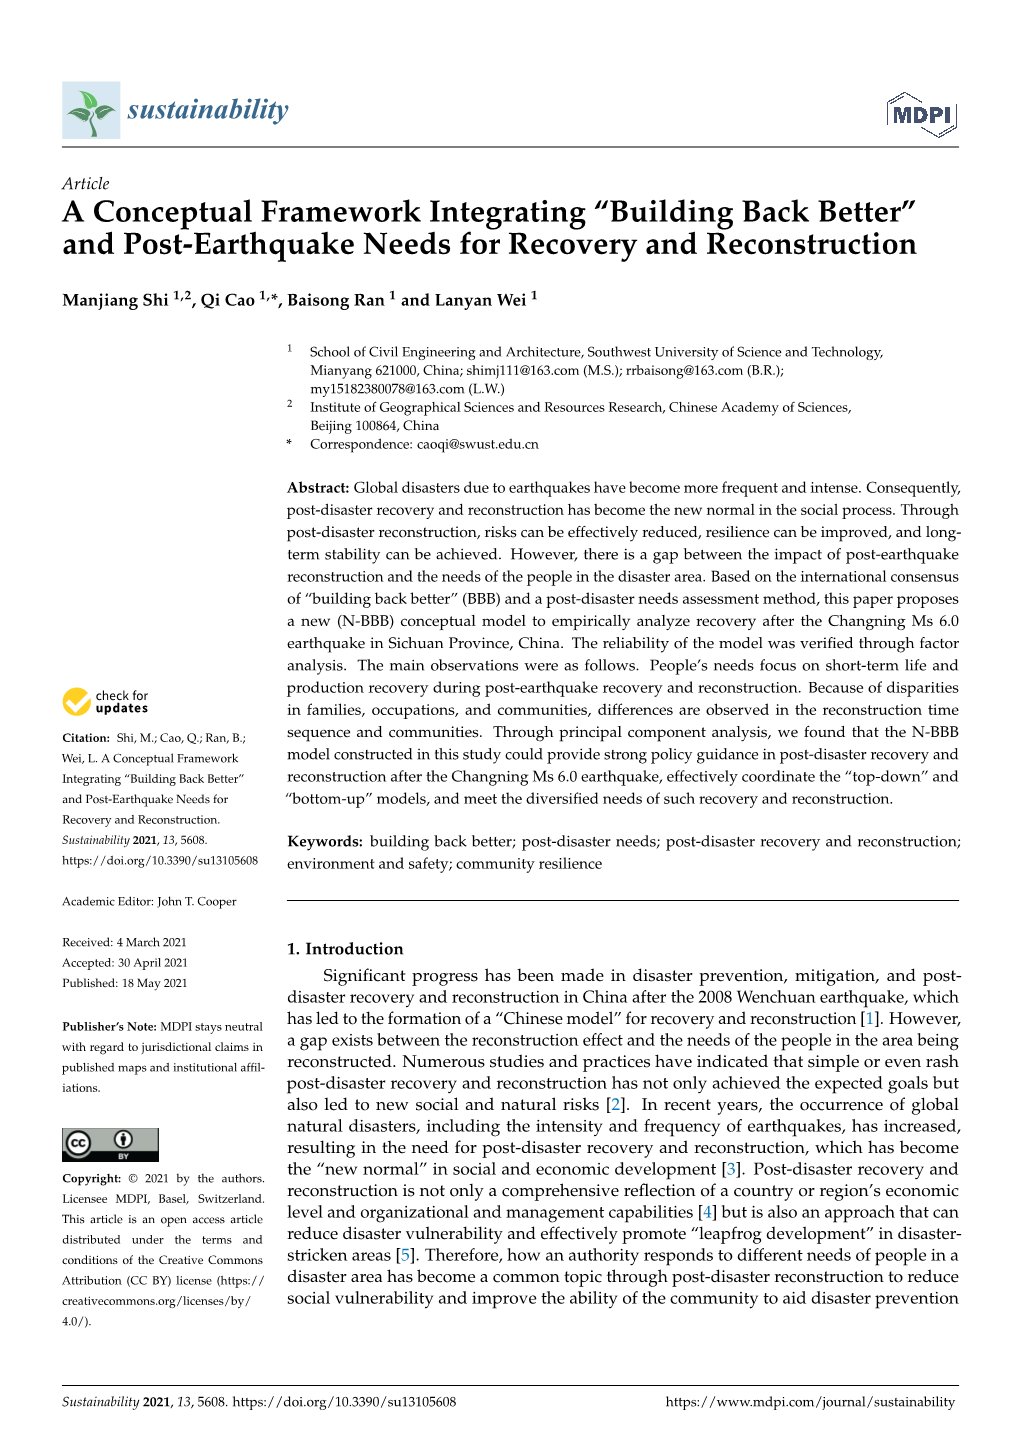 A Conceptual Framework Integrating “Building Back Better” and Post-Earthquake Needs for Recovery and Reconstruction